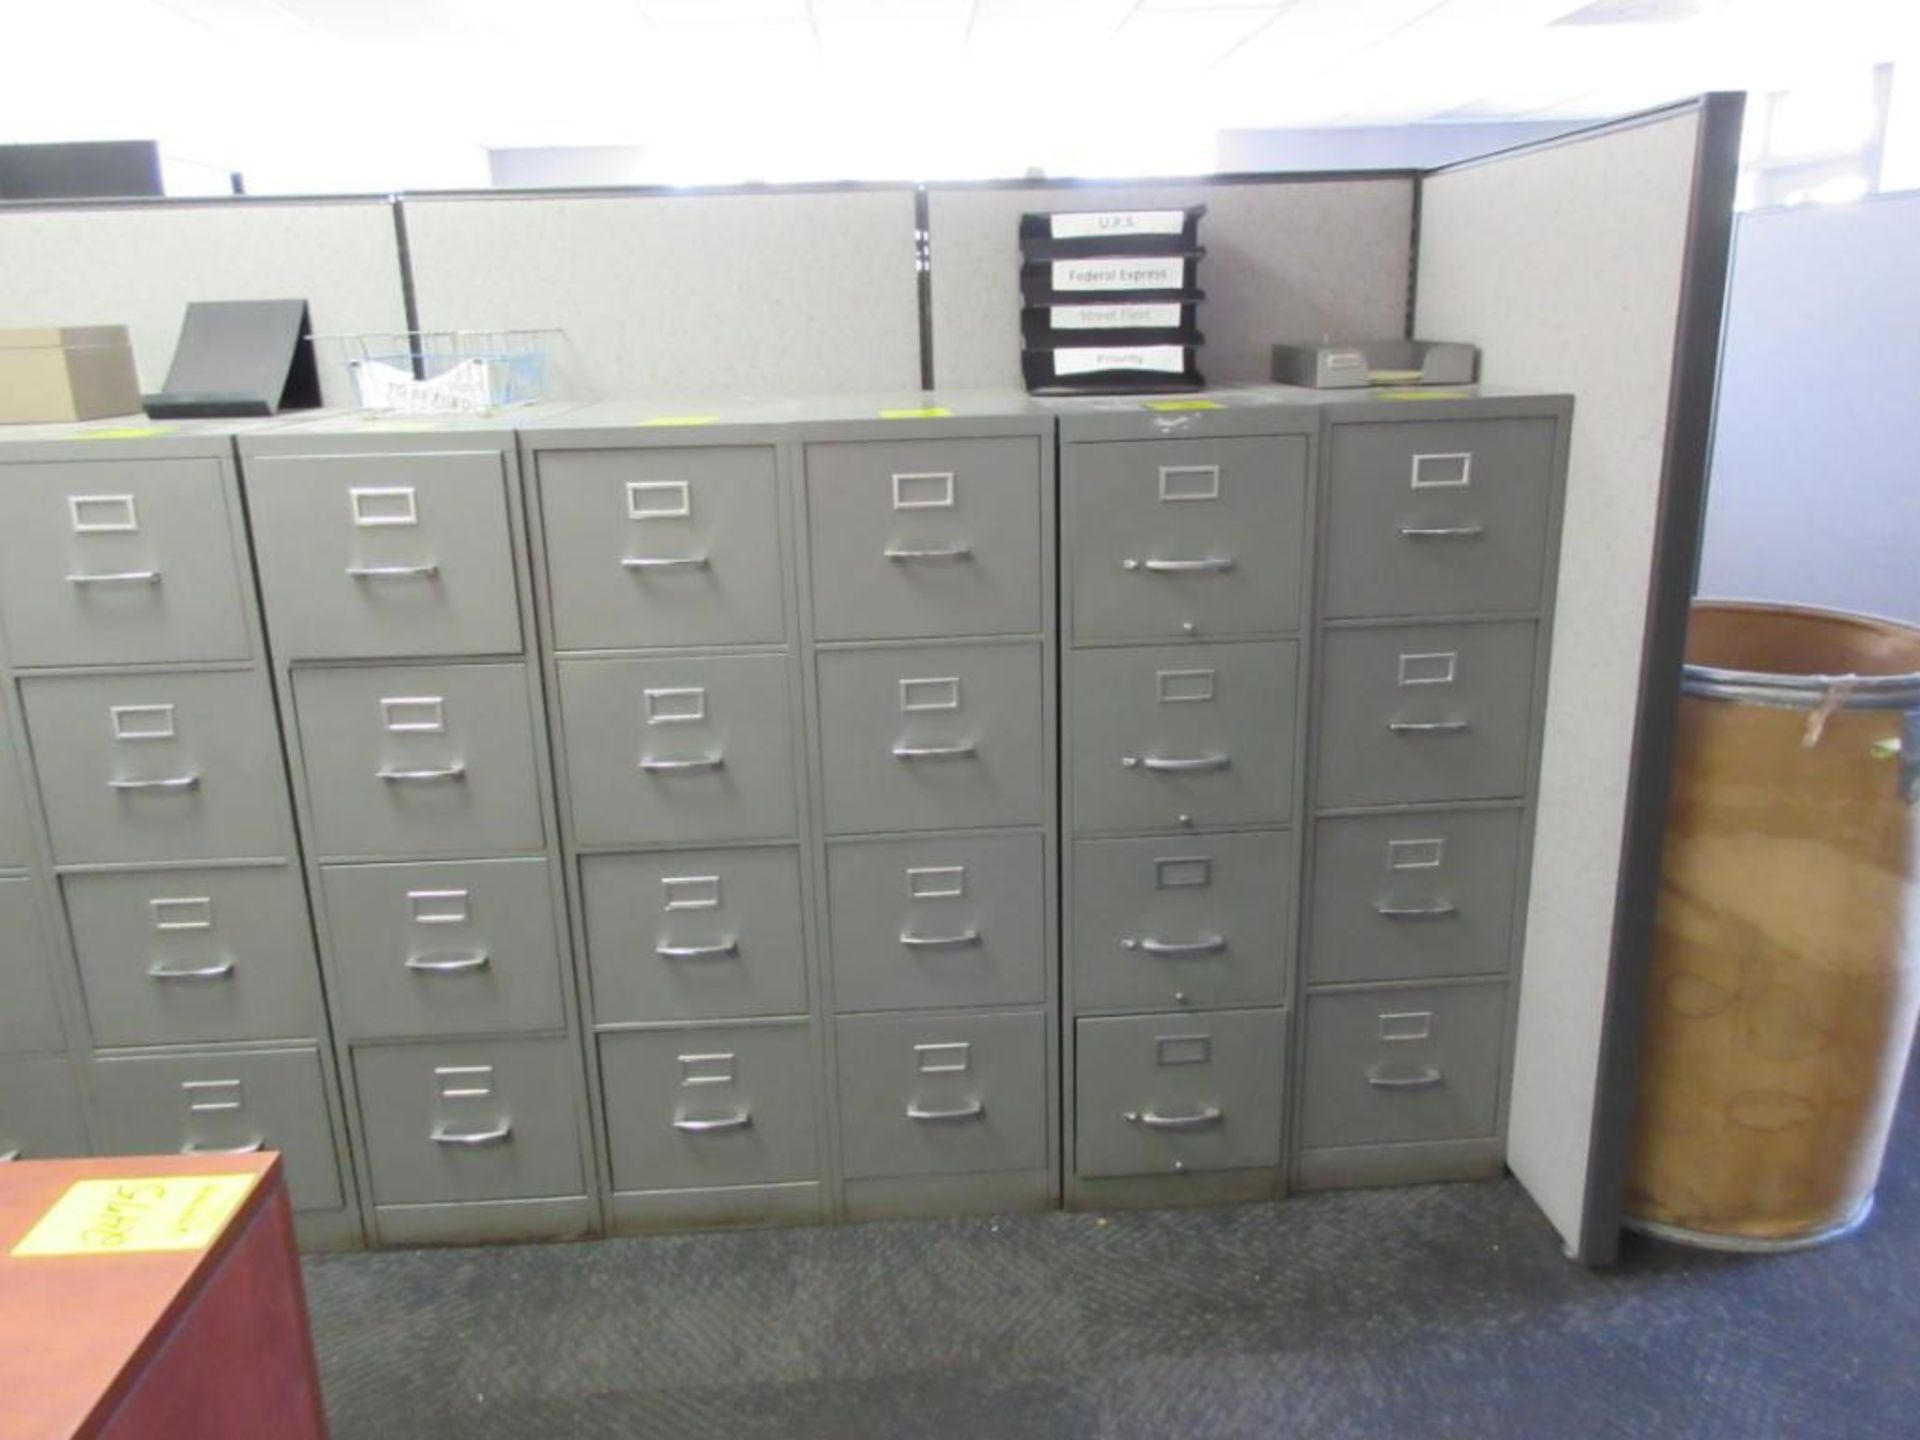 OFFICE AND CONTENTS: DESK CHAIRS FILE CABINETS SHELVING UNIT 2-DOOR CABINET TABLES CUBICLE PANELS - Image 15 of 17